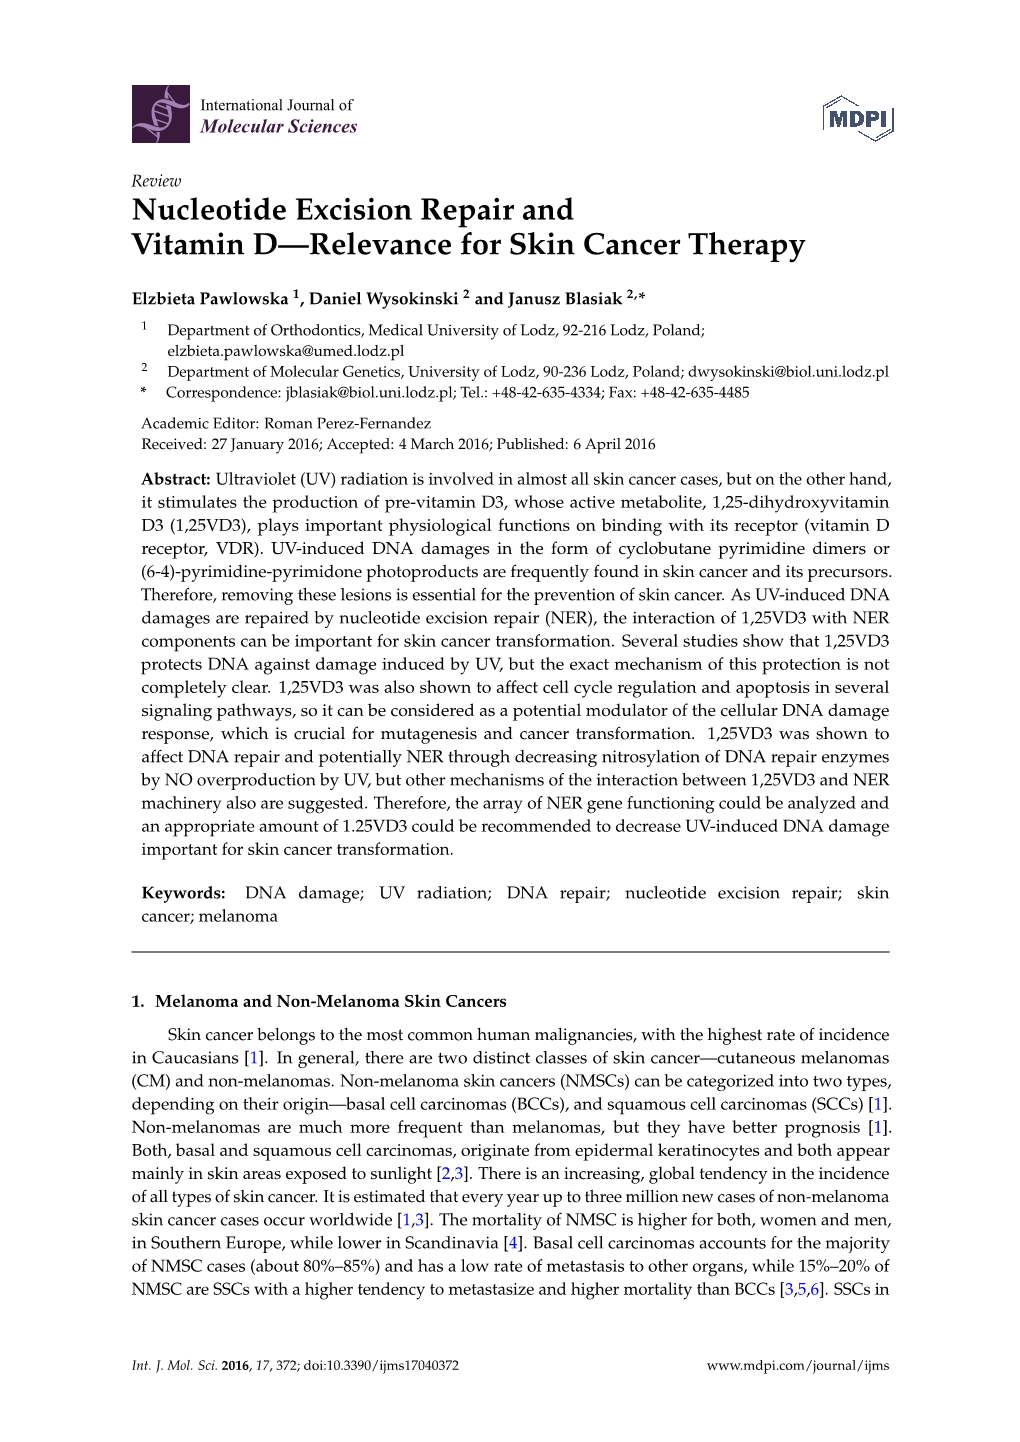 Nucleotide Excision Repair and Vitamin D—Relevance for Skin Cancer Therapy